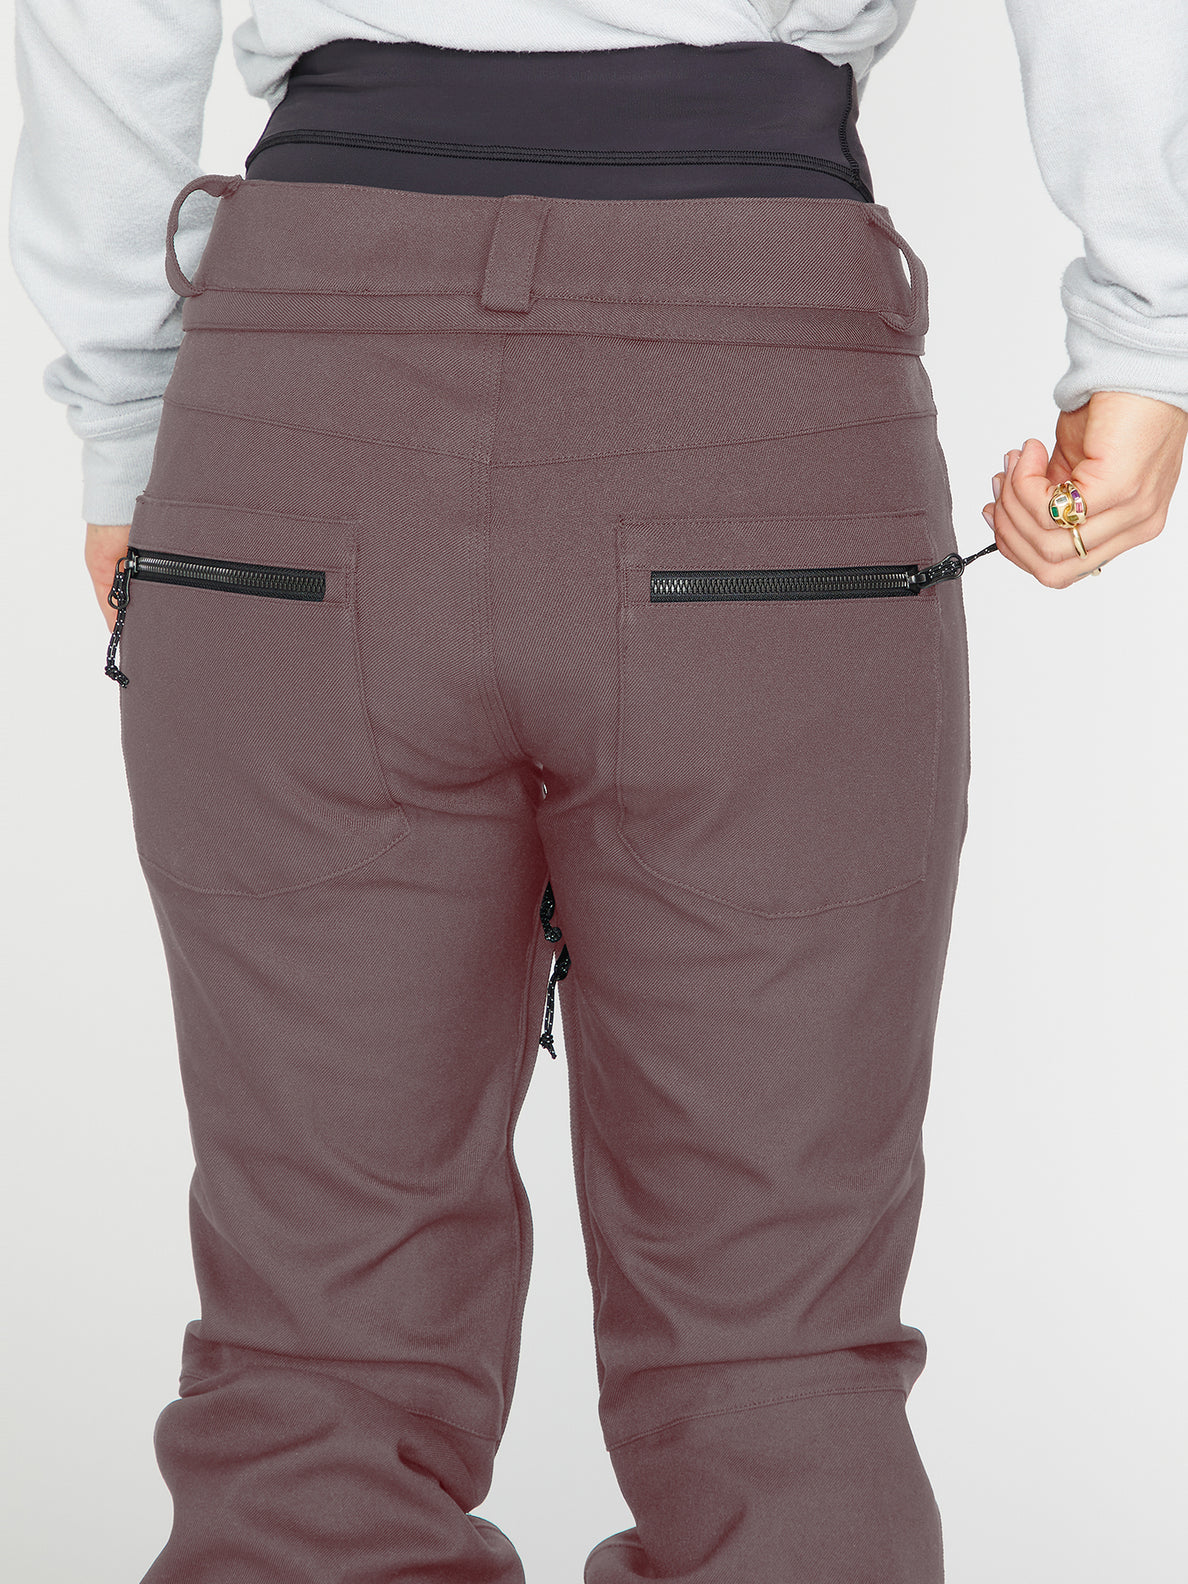 Womens Species Stretch Pants - Rosewood (H1352303_ROS) [2]